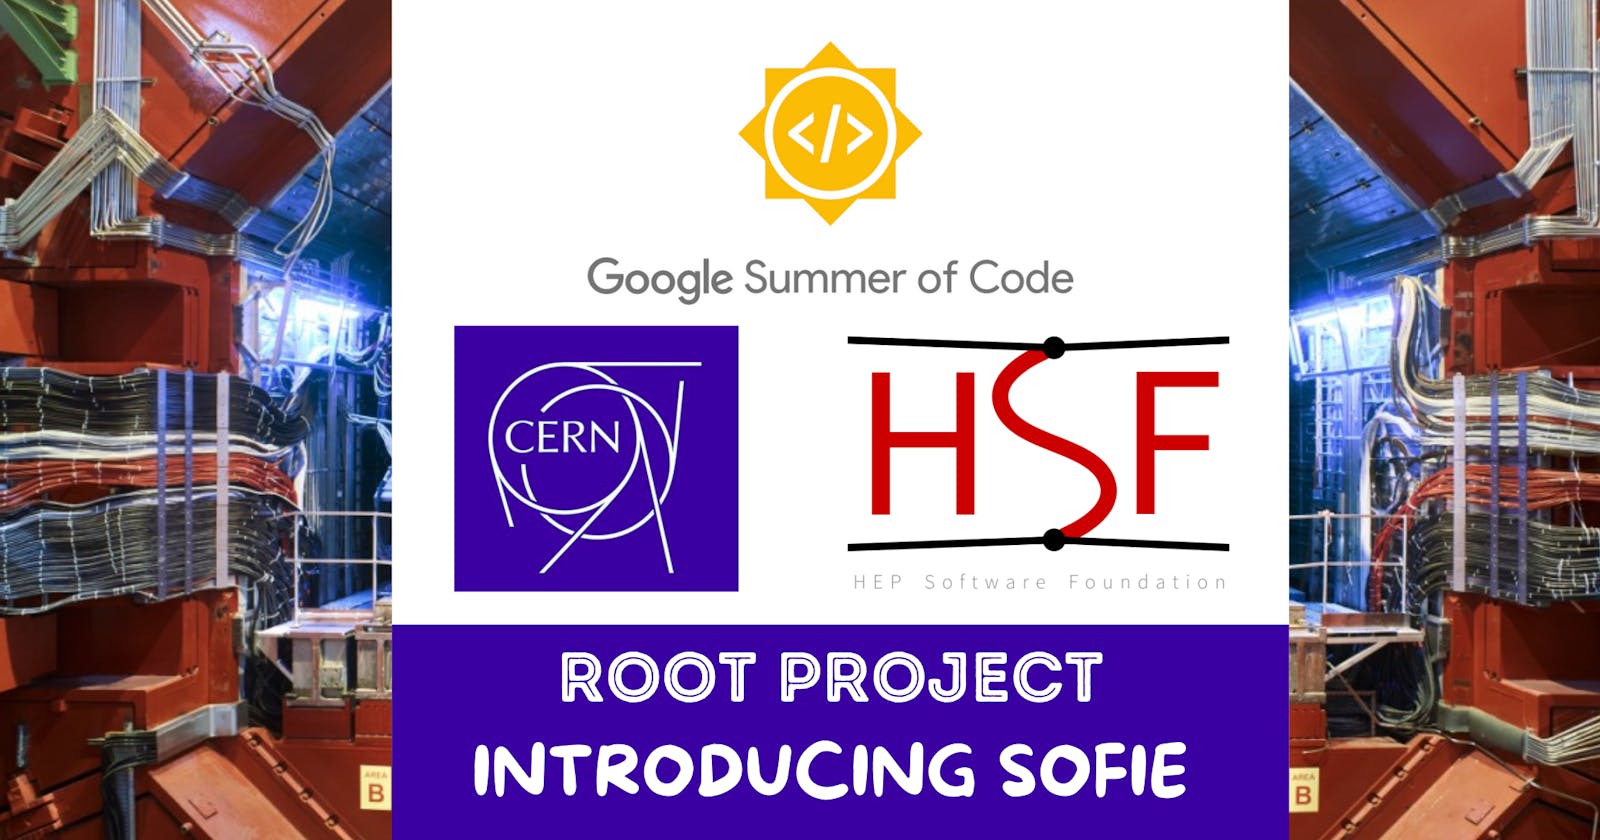 Root-Project: Introducing SOFIE